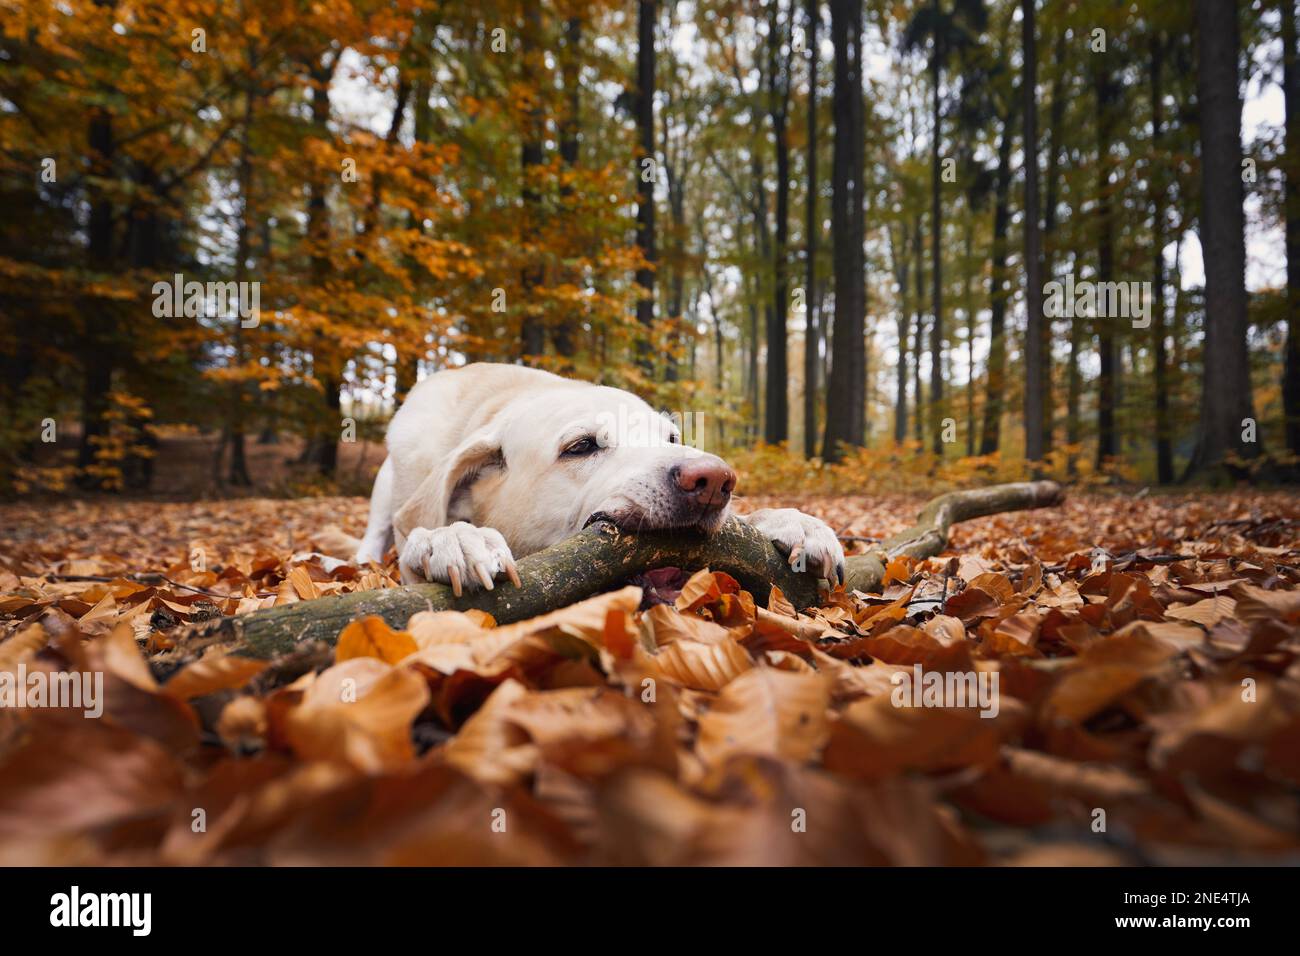 Playful dog in forest. Cute labrador retriever biting stick during autumn day. Stock Photo